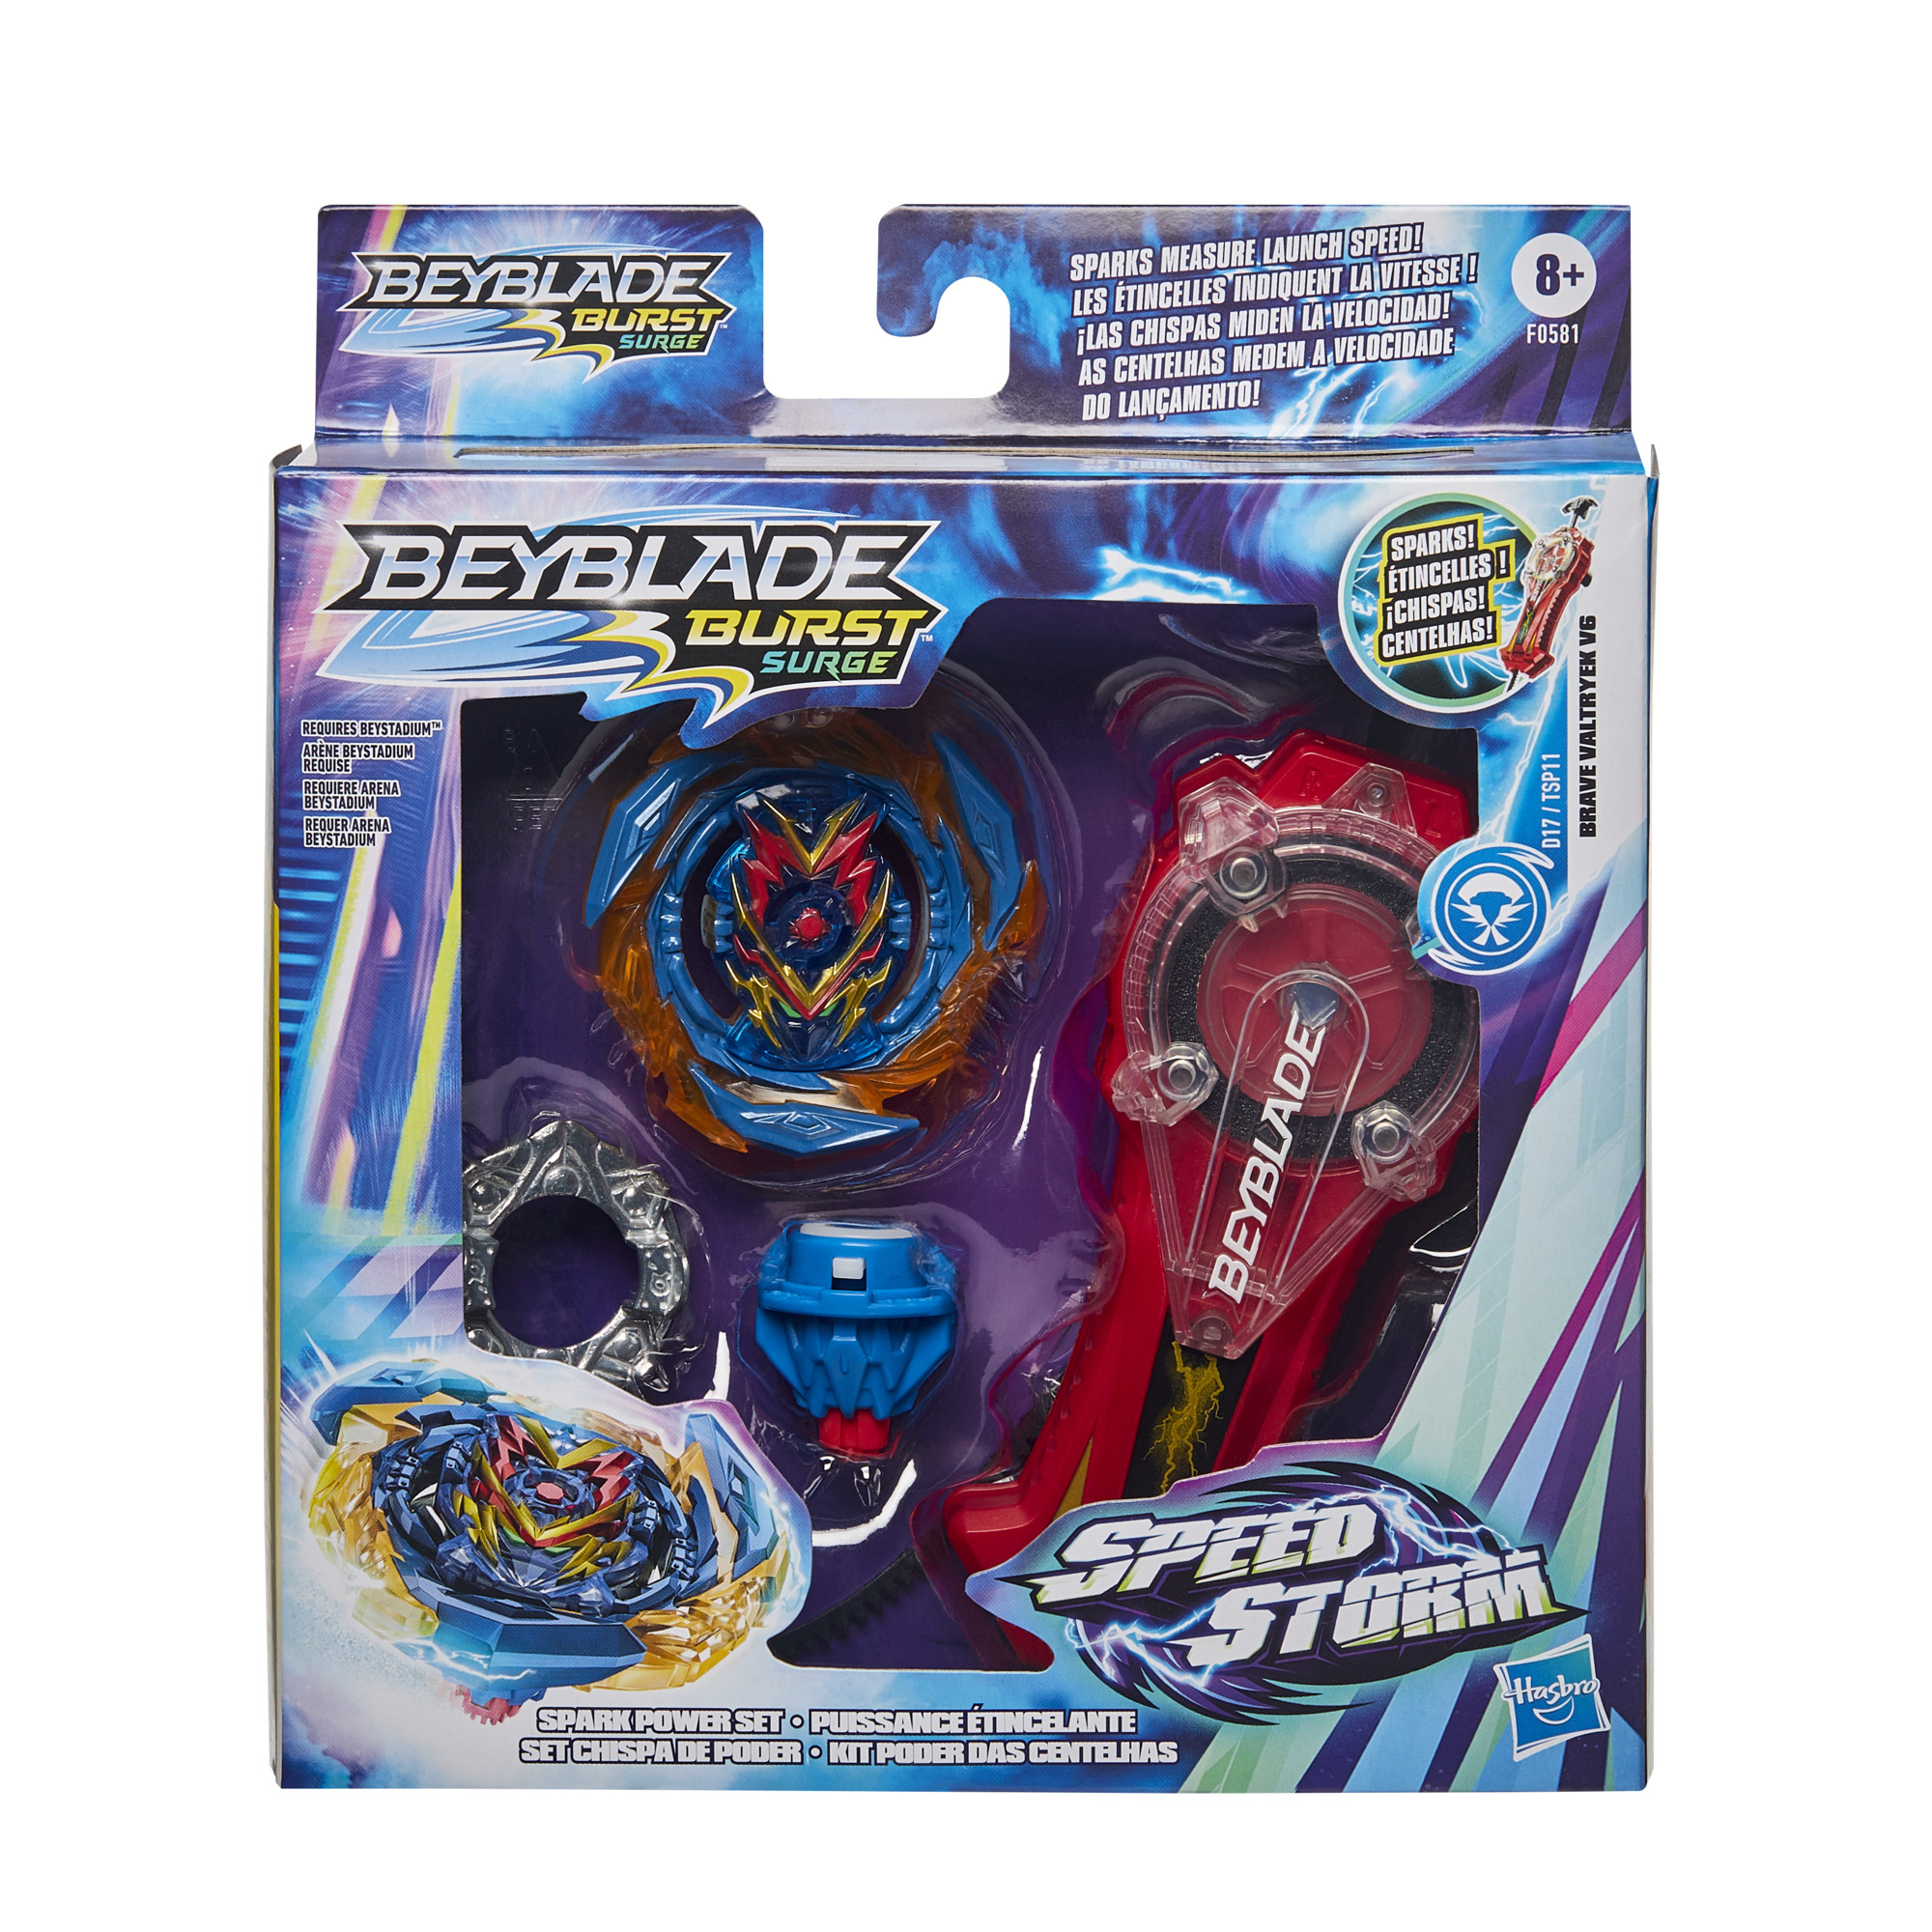 Spark Power Set Beyblade Wiki Fandom Beyblade burst all valtryek qr codes thank you for watching my video forget to like my video and subscribe to my channel. spark power set beyblade wiki fandom